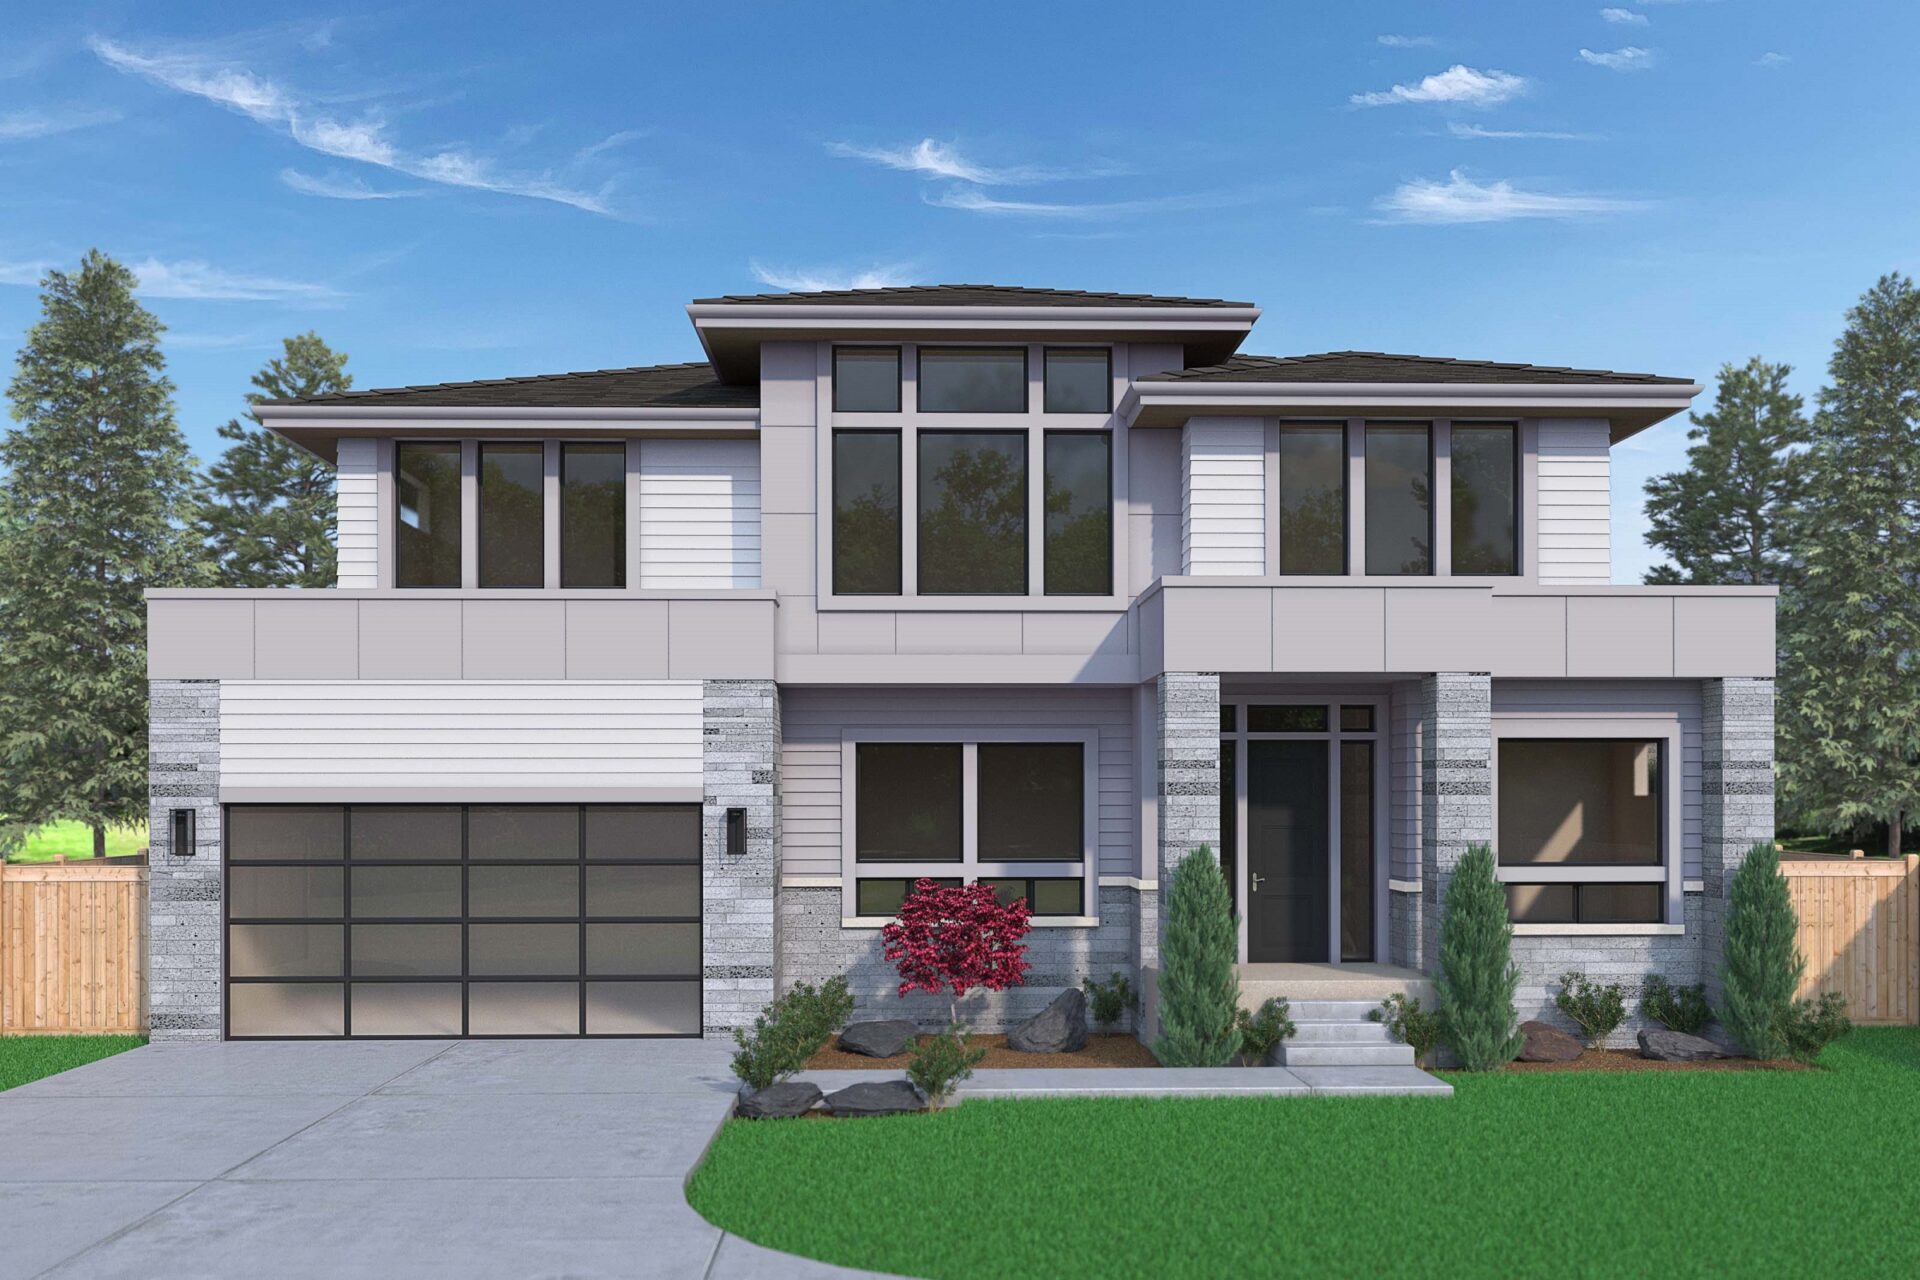 View our new luxury home construction on 1016 166th Pl NE, in Bellevue, WA from MN Custom Homes